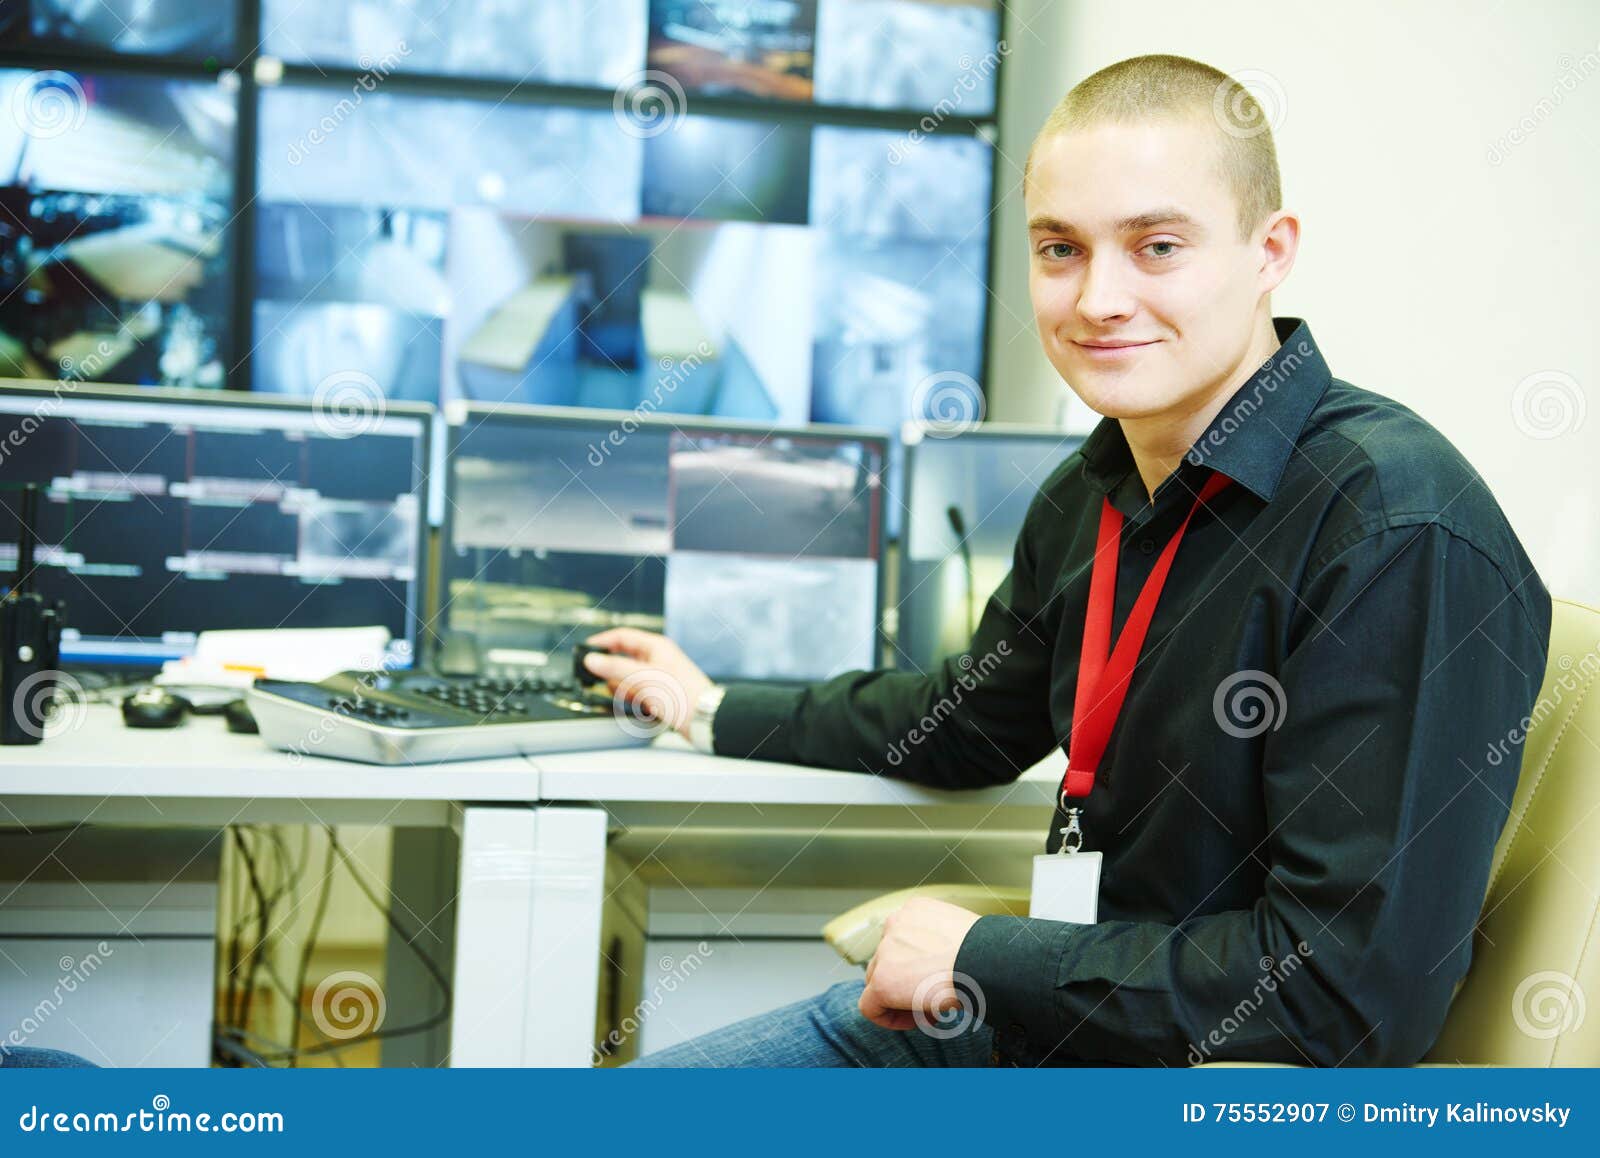 Video Monitoring Surveillance Security System Stock Image Image